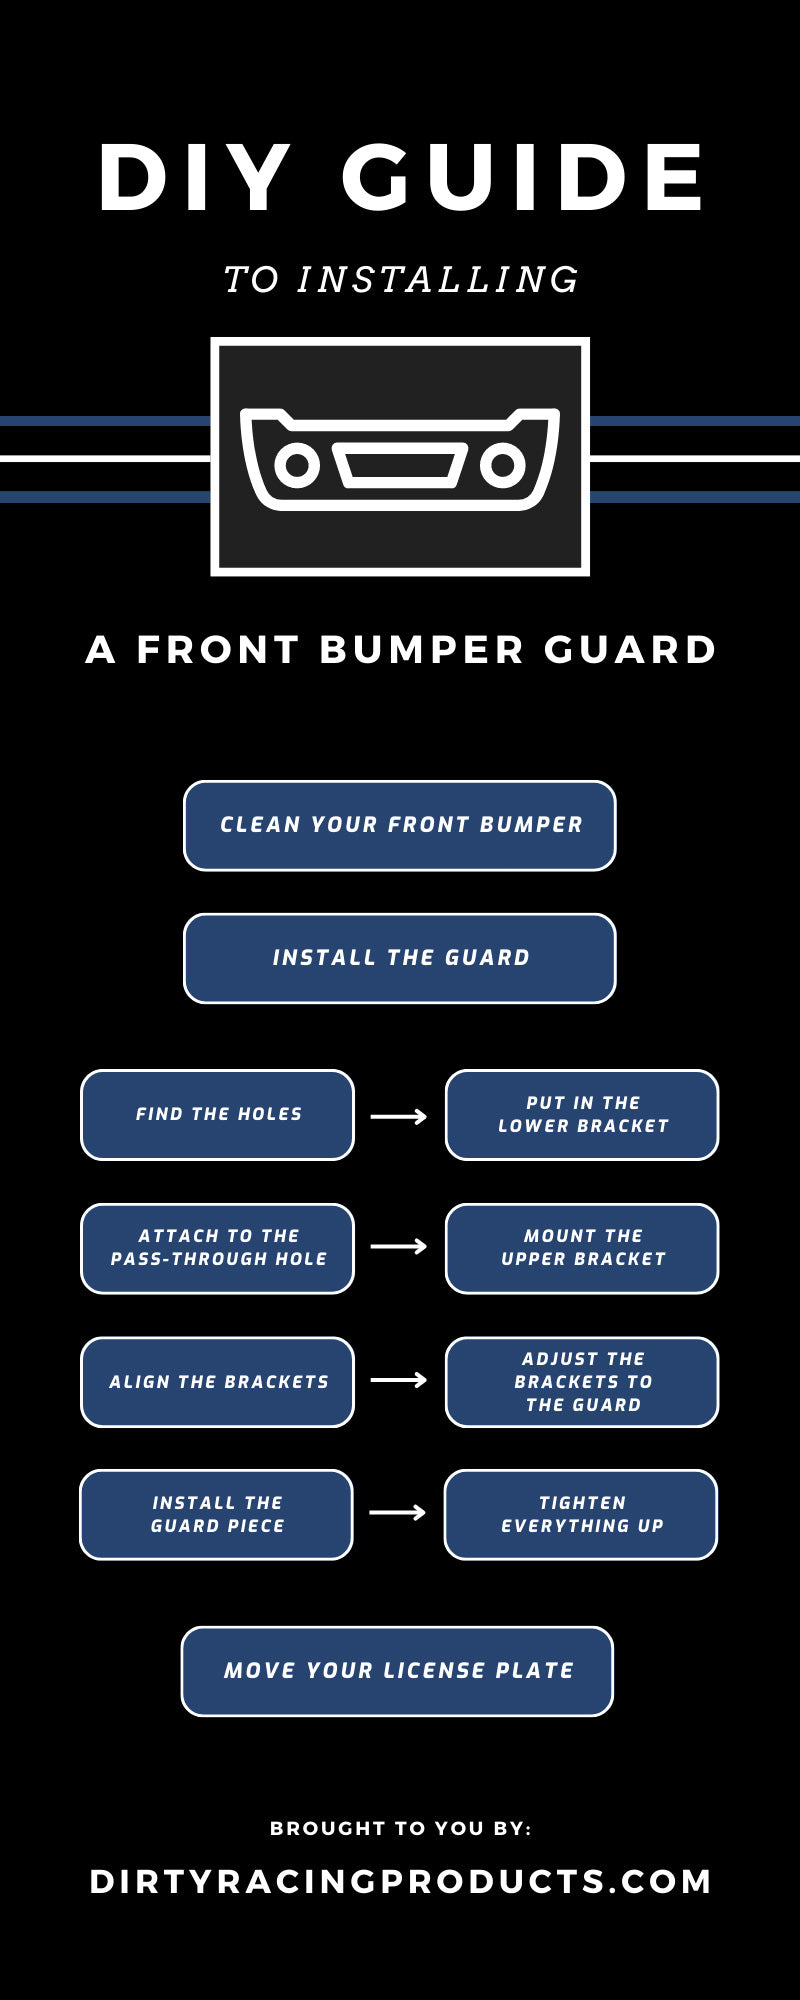 DIY Guide to Installing a Front Bumper Guard